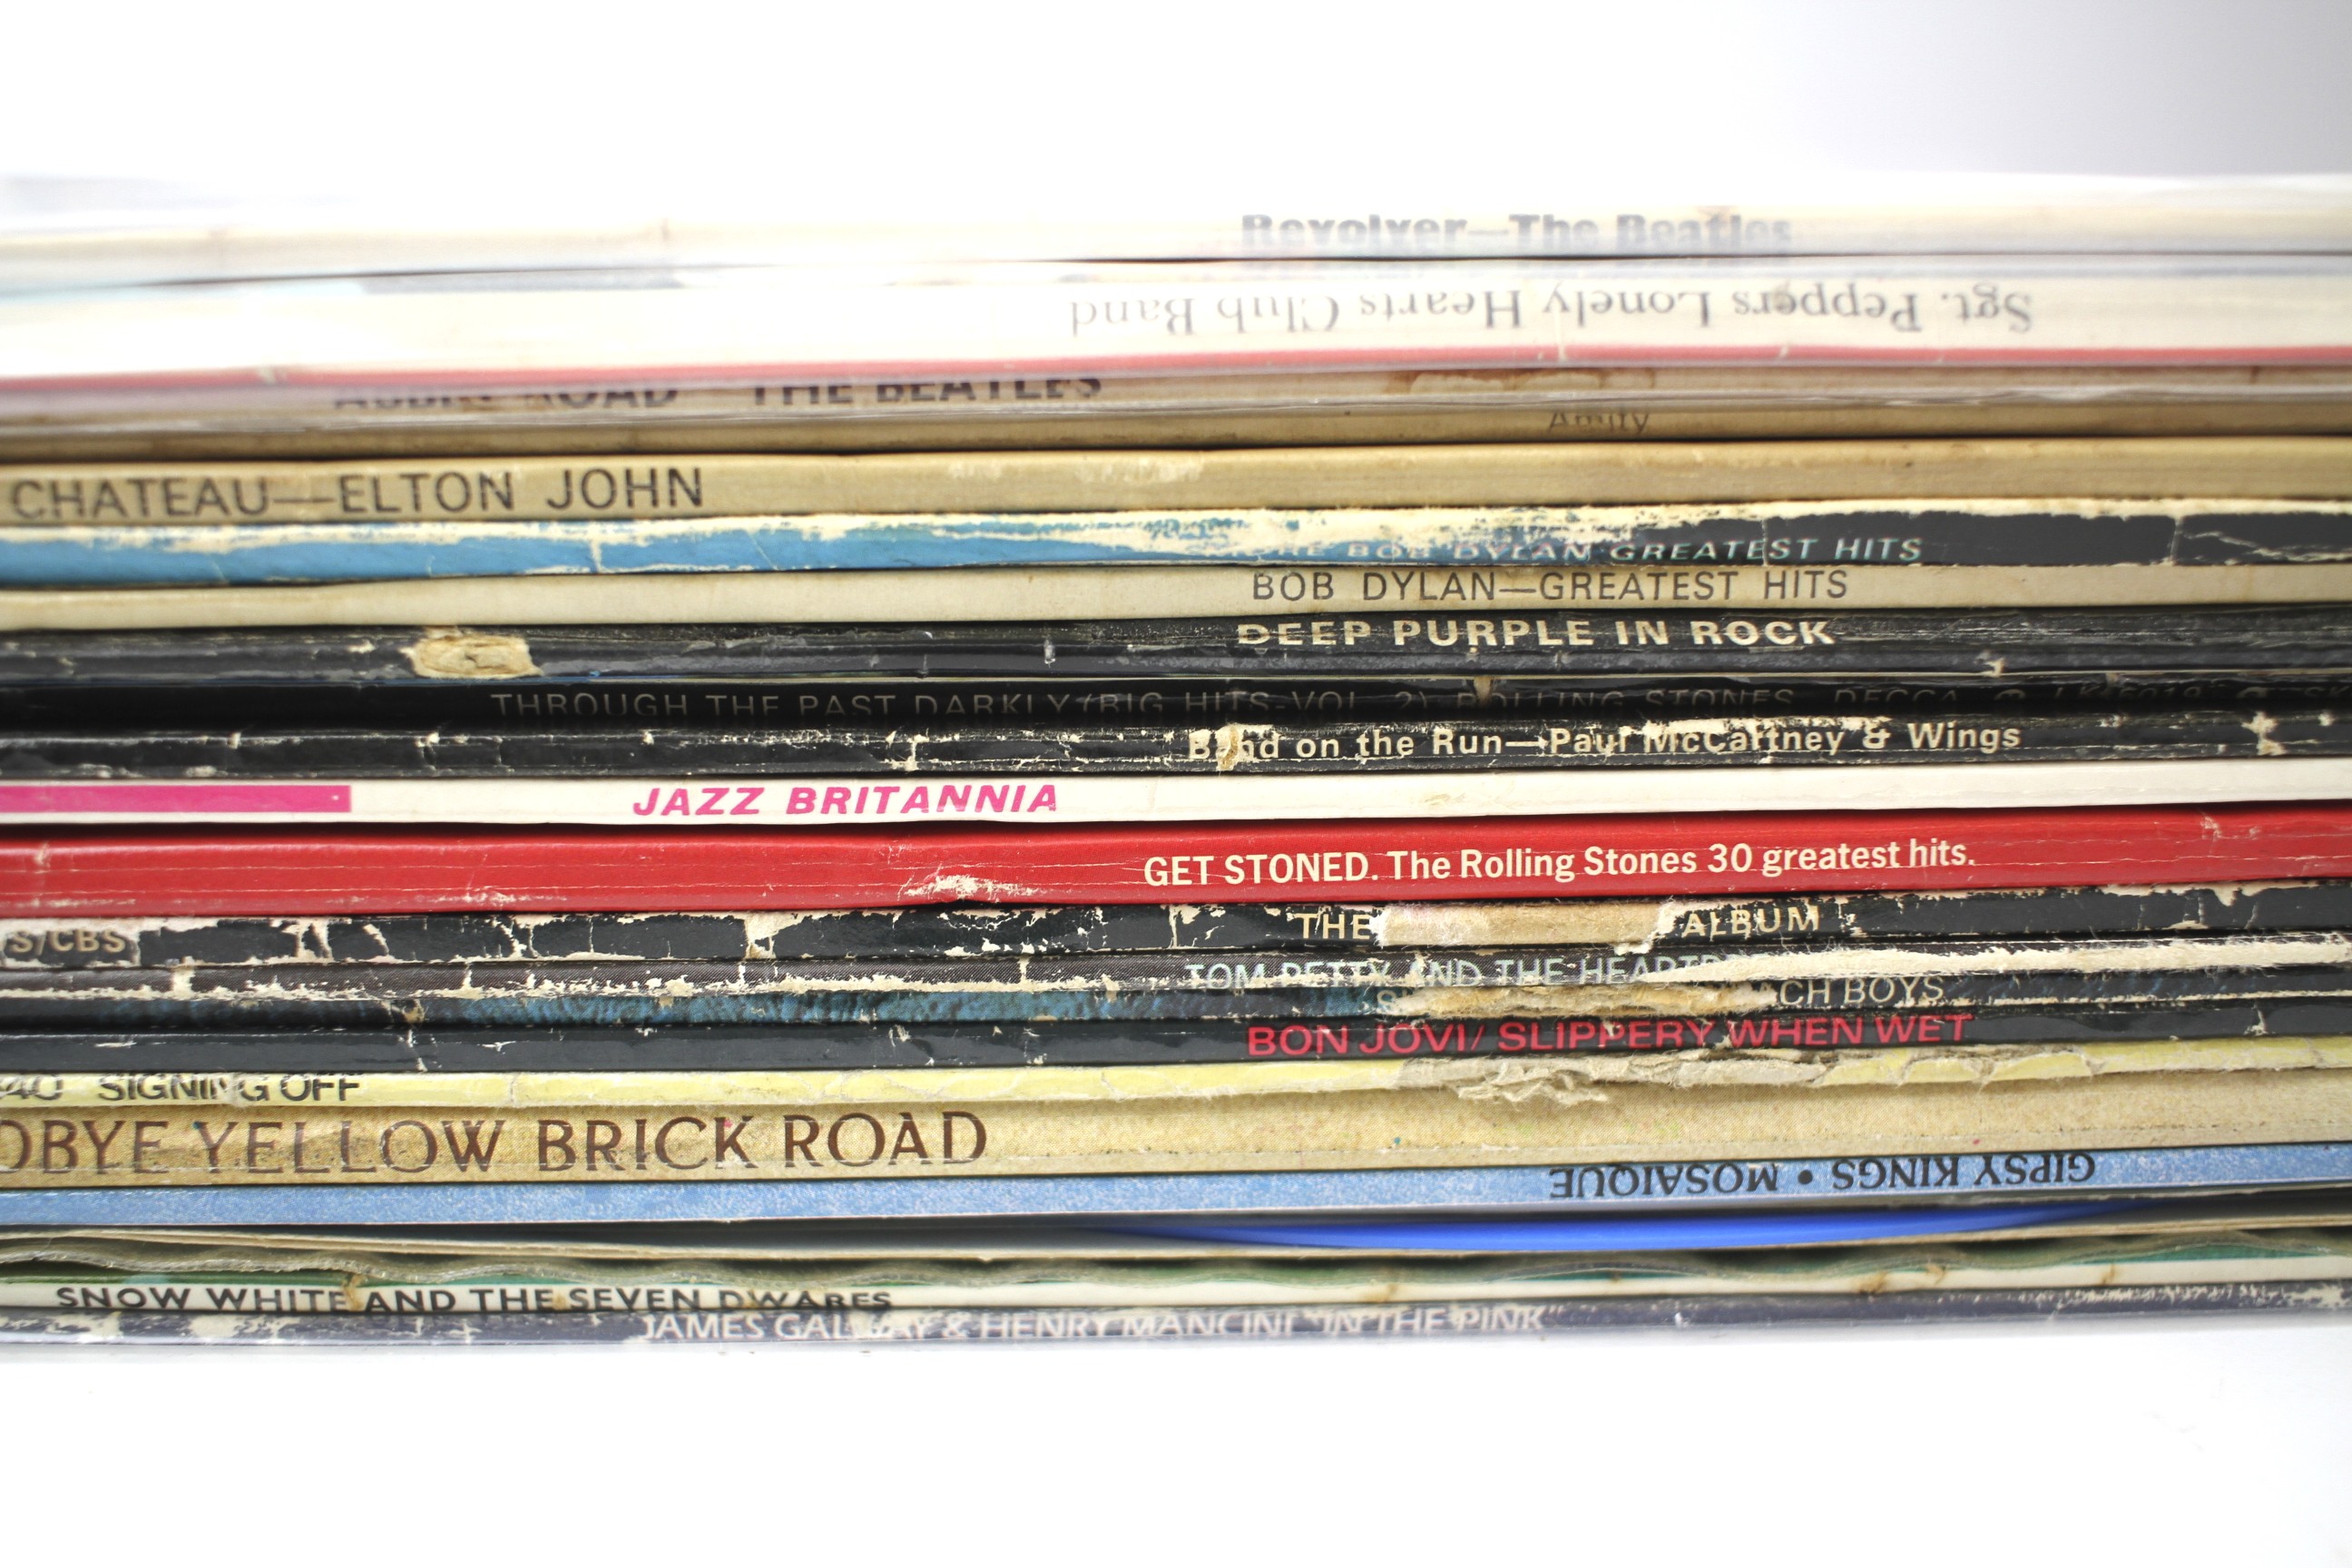 An assortment of vinyl albums and LPs. - Image 2 of 3